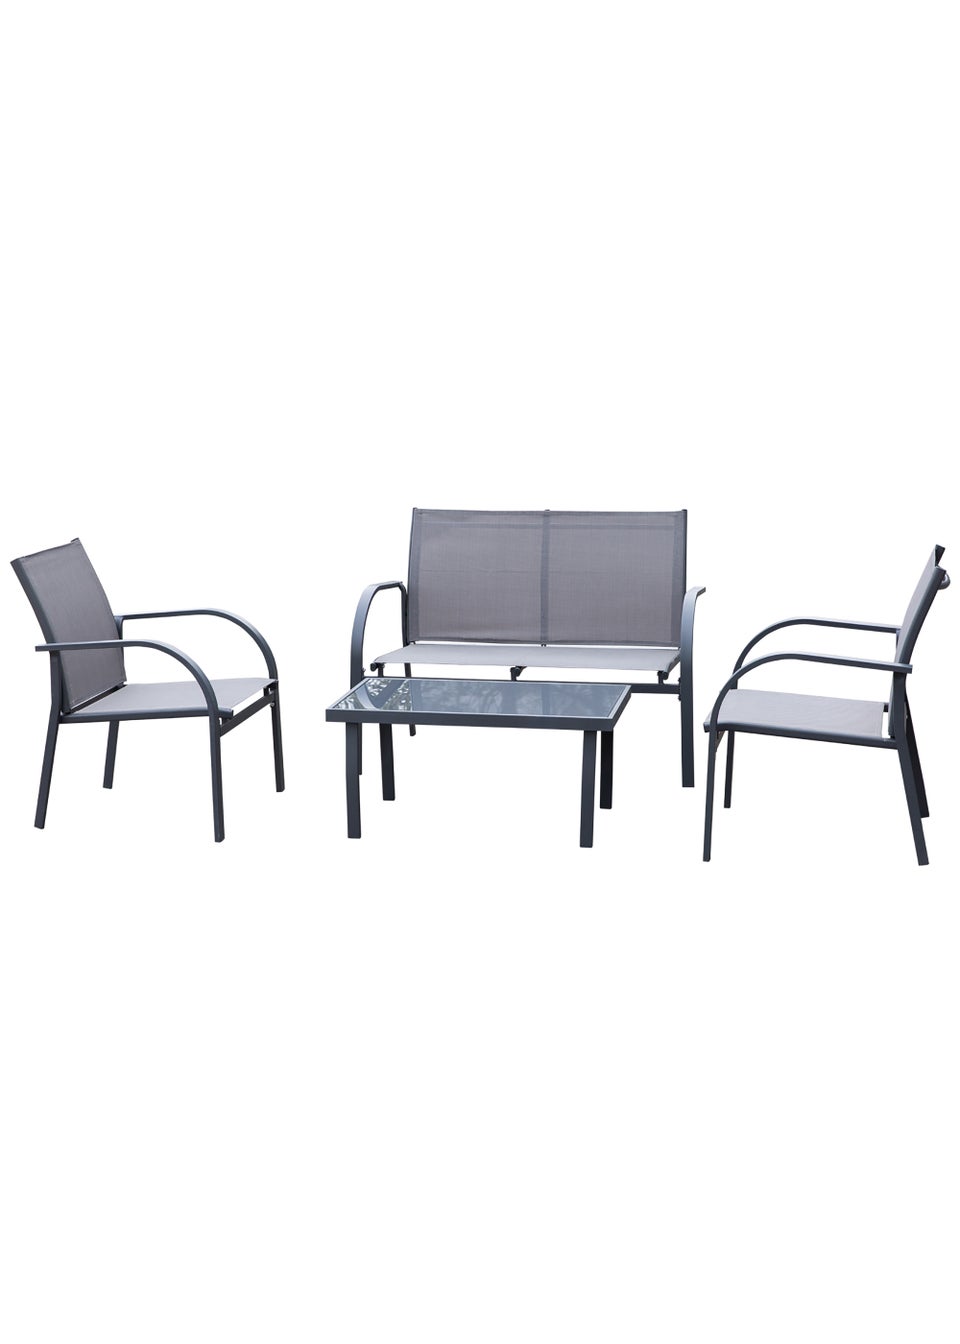 Outsunny 4 Piece Curved Steel Dining Set